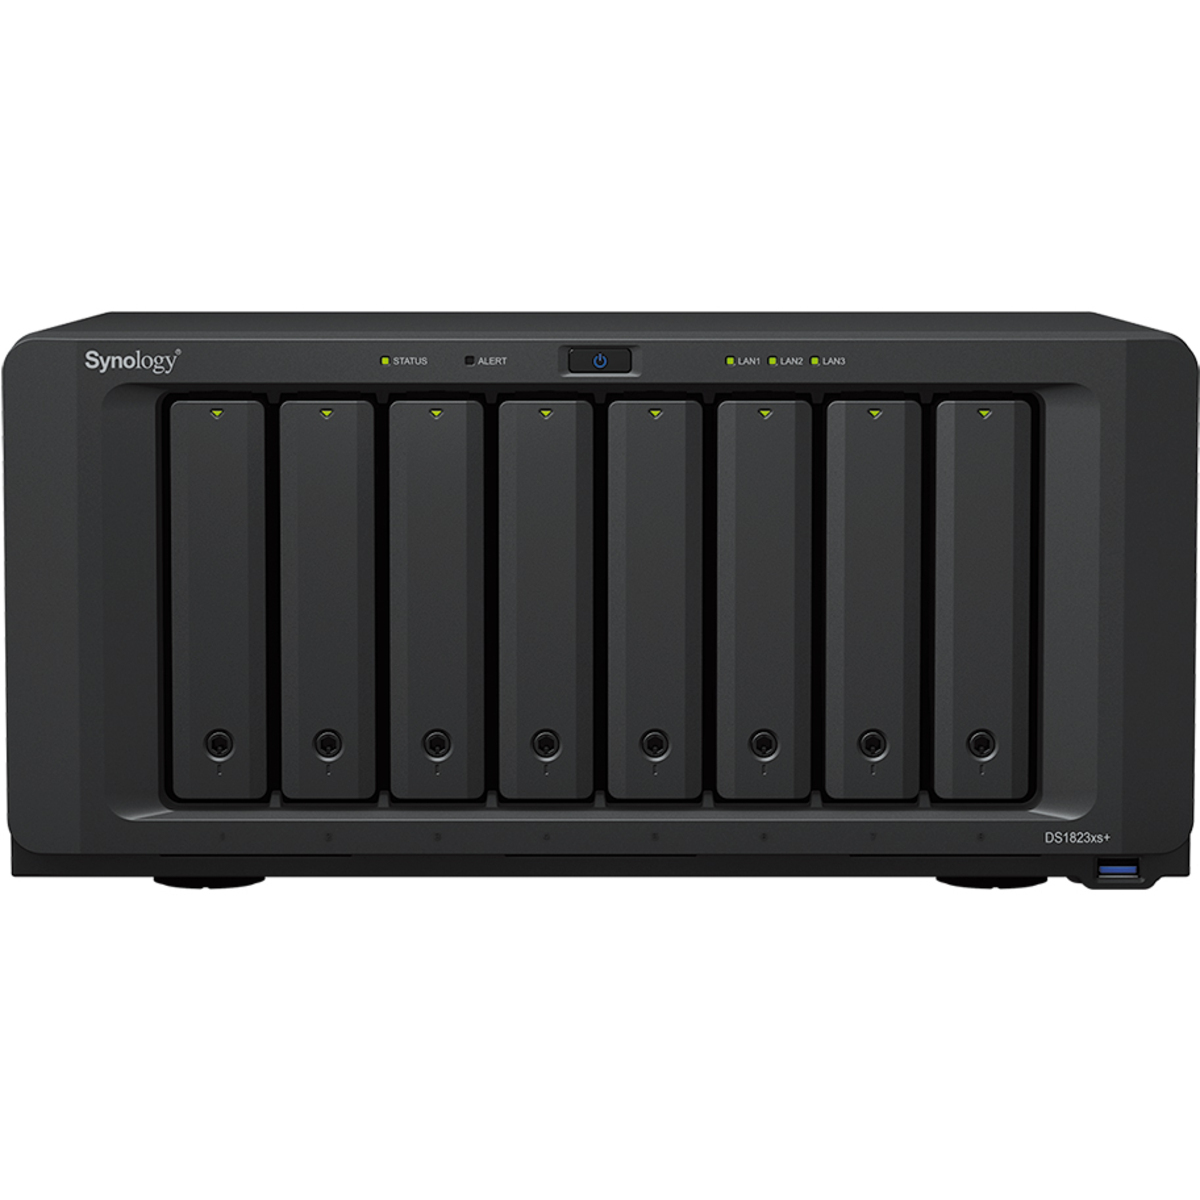 Synology DiskStation DS1823xs+ 192tb 8-Bay Desktop Multimedia / Power User / Business NAS - Network Attached Storage Device 8x24tb Seagate IronWolf Pro ST24000NT002 3.5 7200rpm SATA 6Gb/s HDD NAS Class Drives Installed - Burn-In Tested DiskStation DS1823xs+